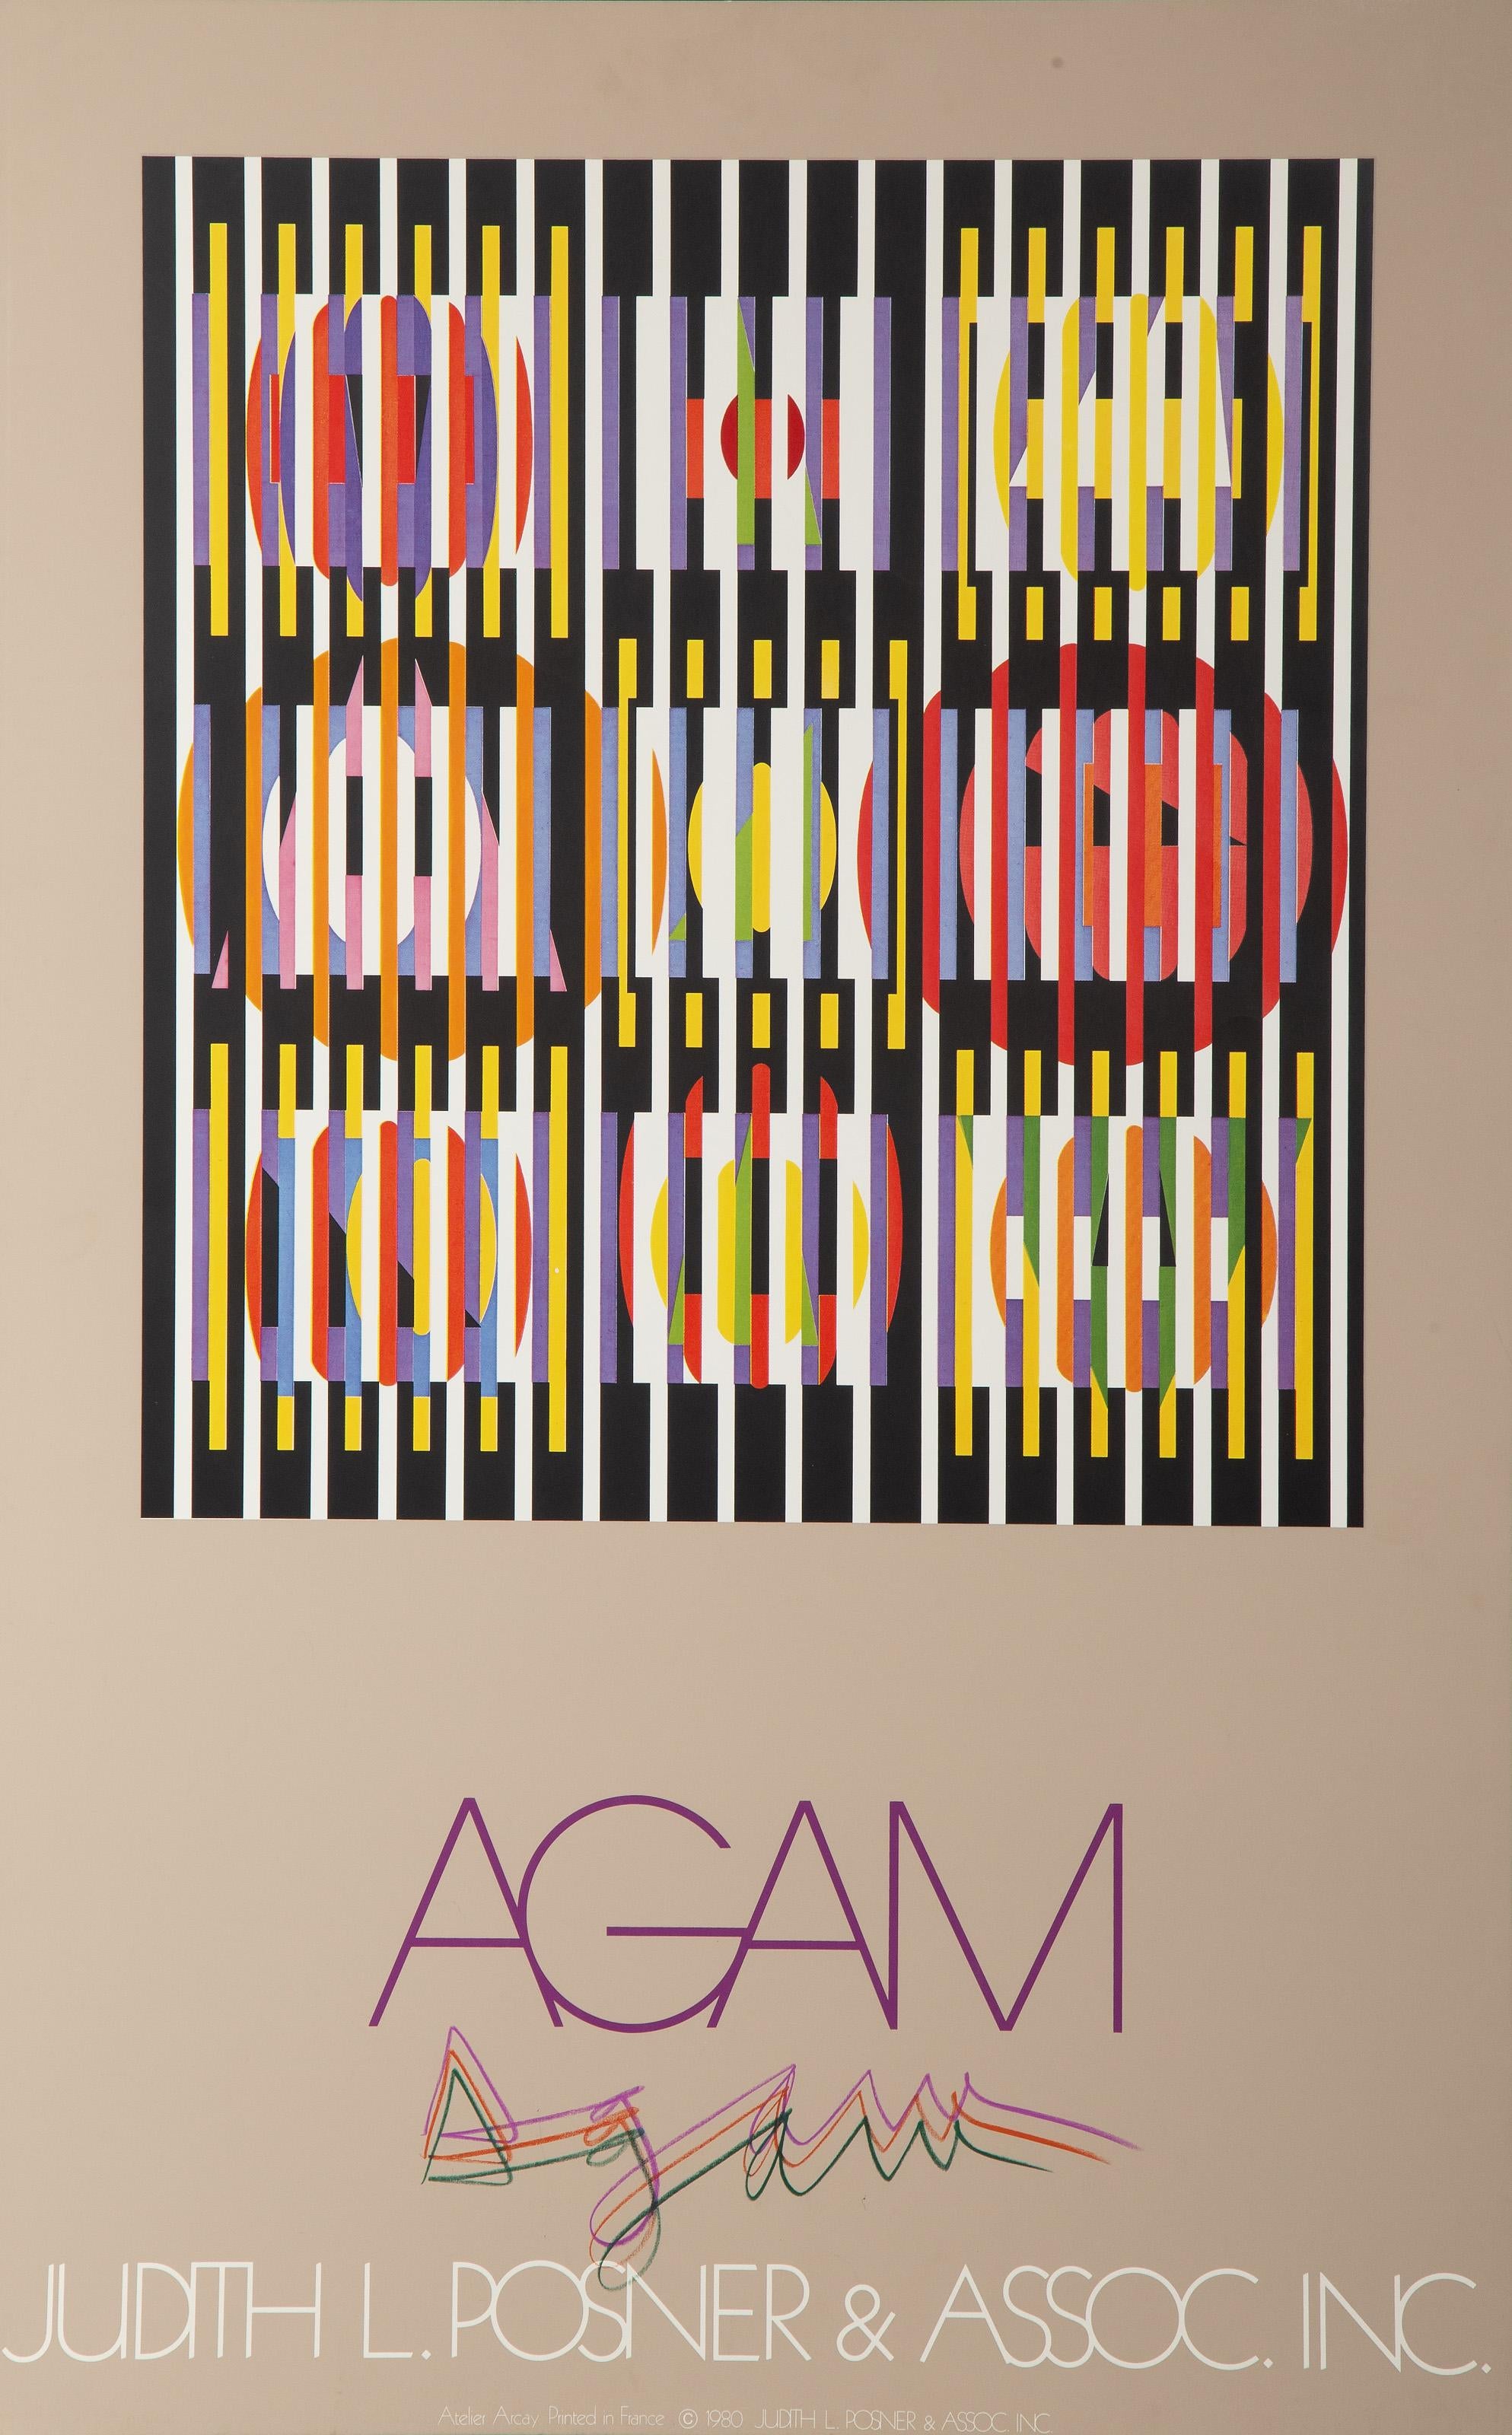 Judith L. Posner and Association Poster
Yaacov Agam, Israeli (1928)
Date: 1980
Screenprint Poster, unique signature in colored pencil
Size: 38 x 23.75 in. (96.52 x 60.33 cm)